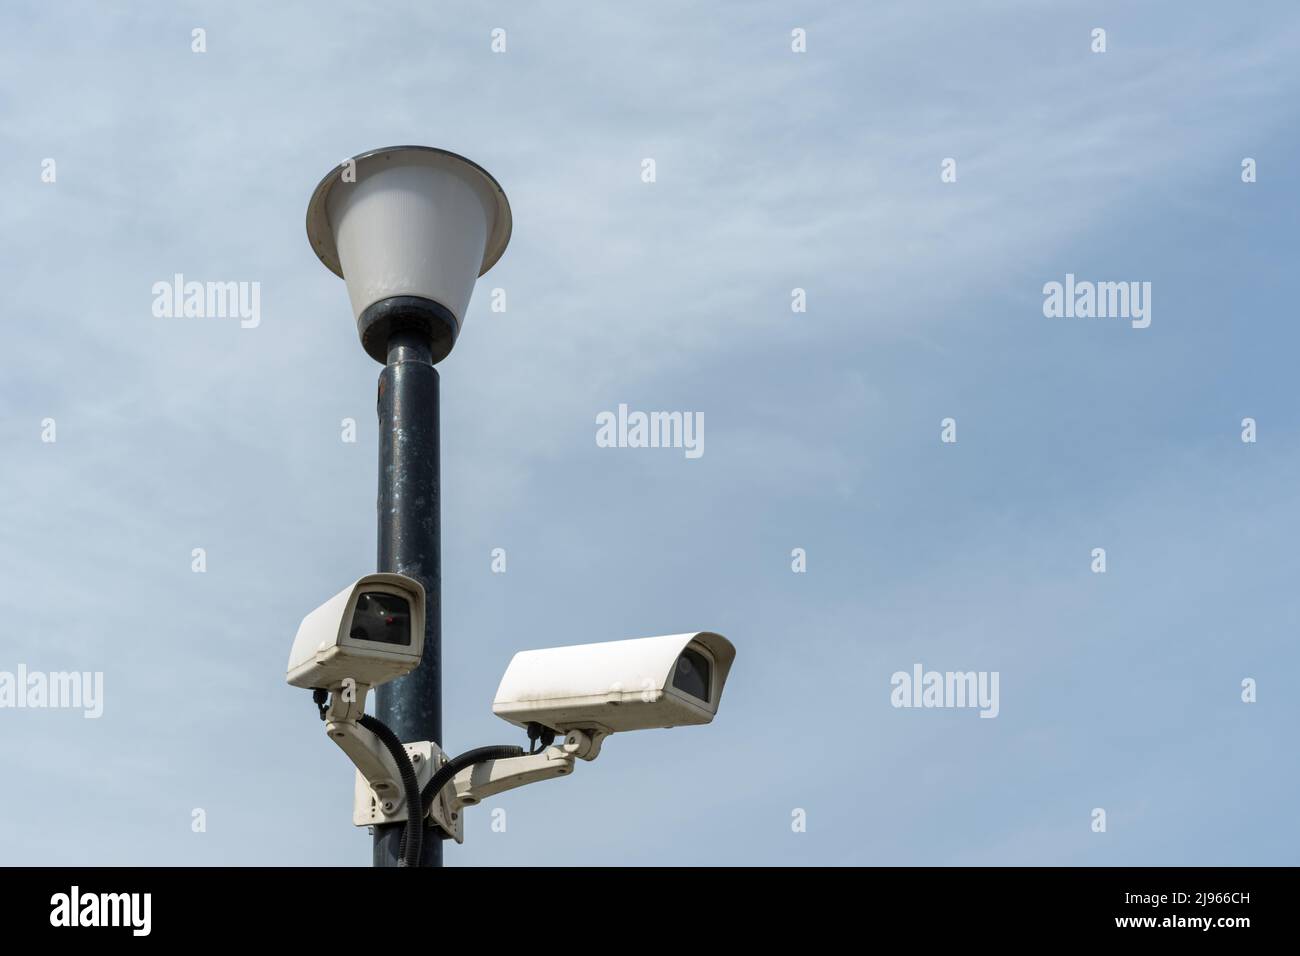 Surveillance cameras mounted on a lamp post against a blue sky. security cctv camera. Security in the city. Hidden filming of what is happening. Moder Stock Photo